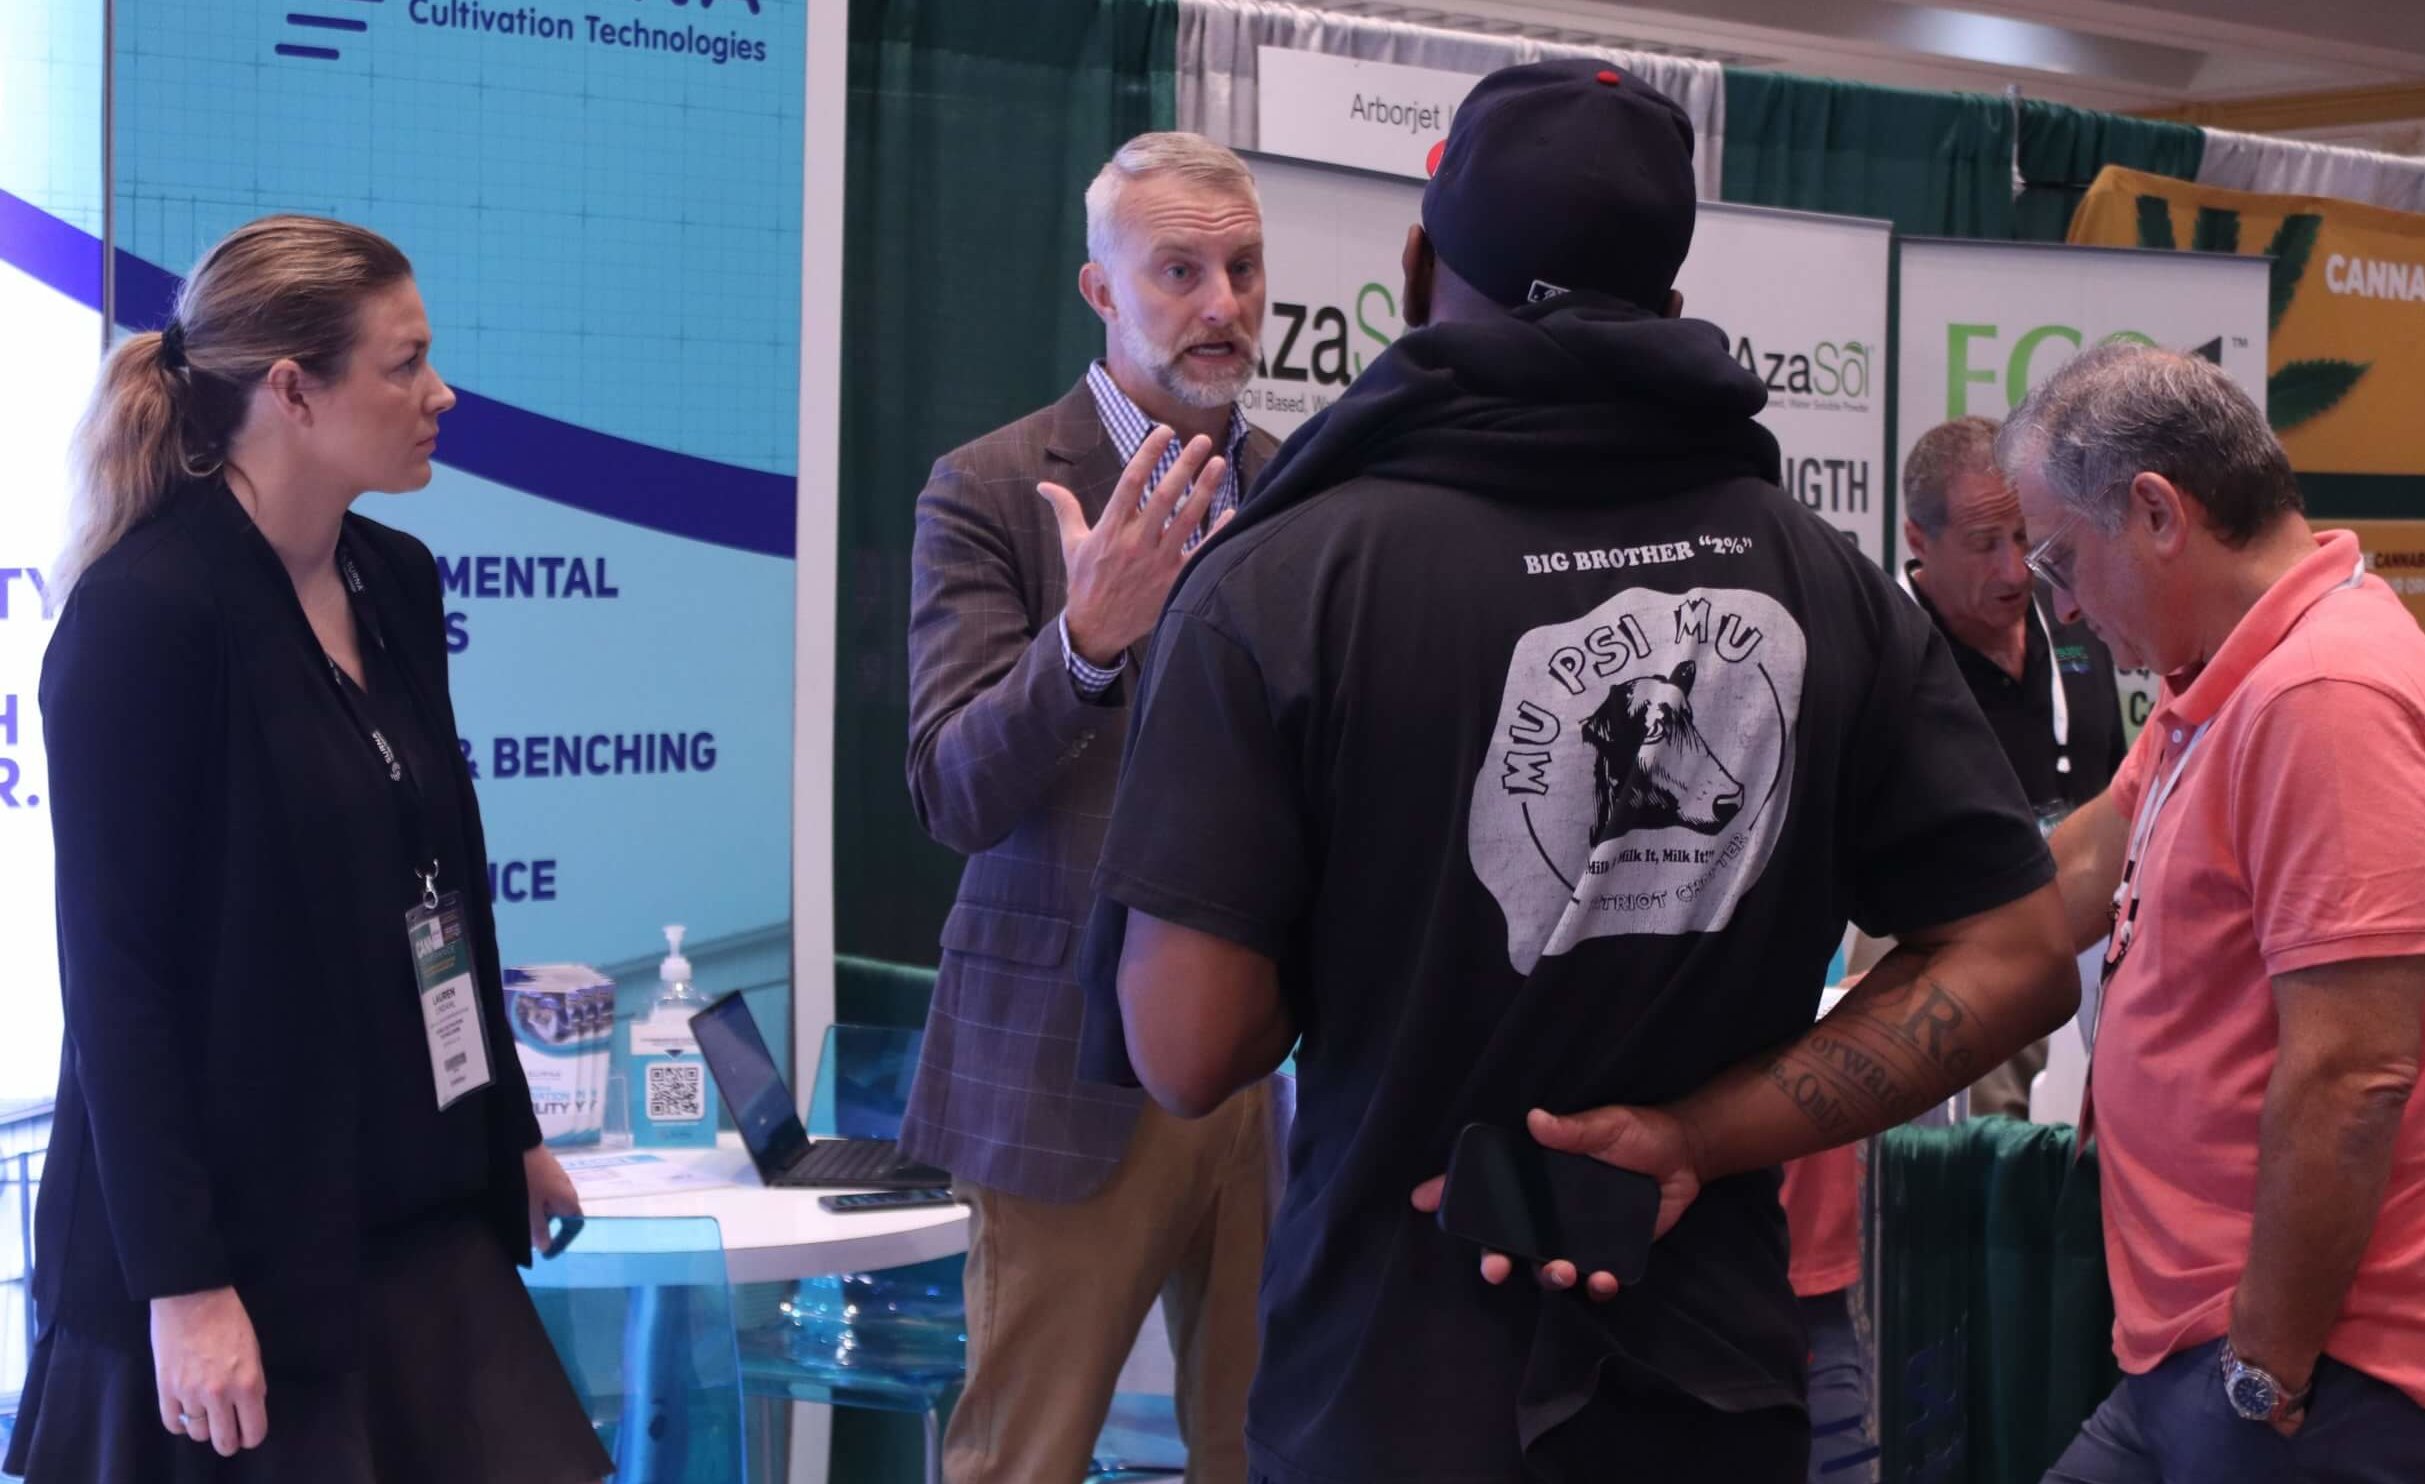 surna team talks to attendees at cannabis conference